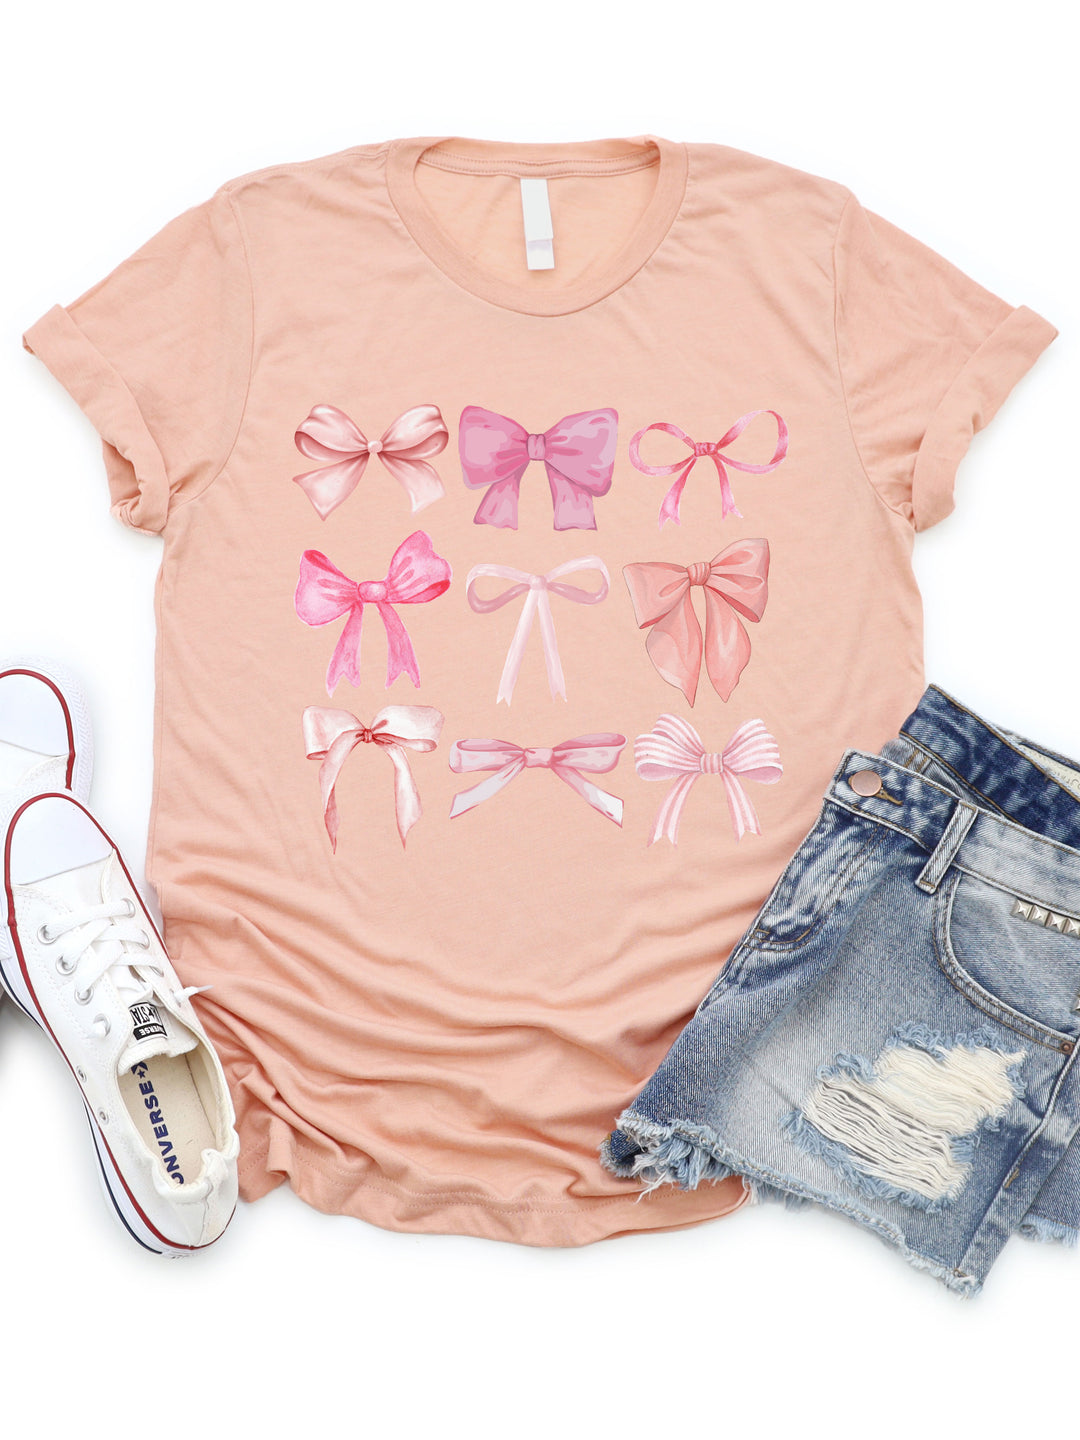 Pink Bows Graphic Tee